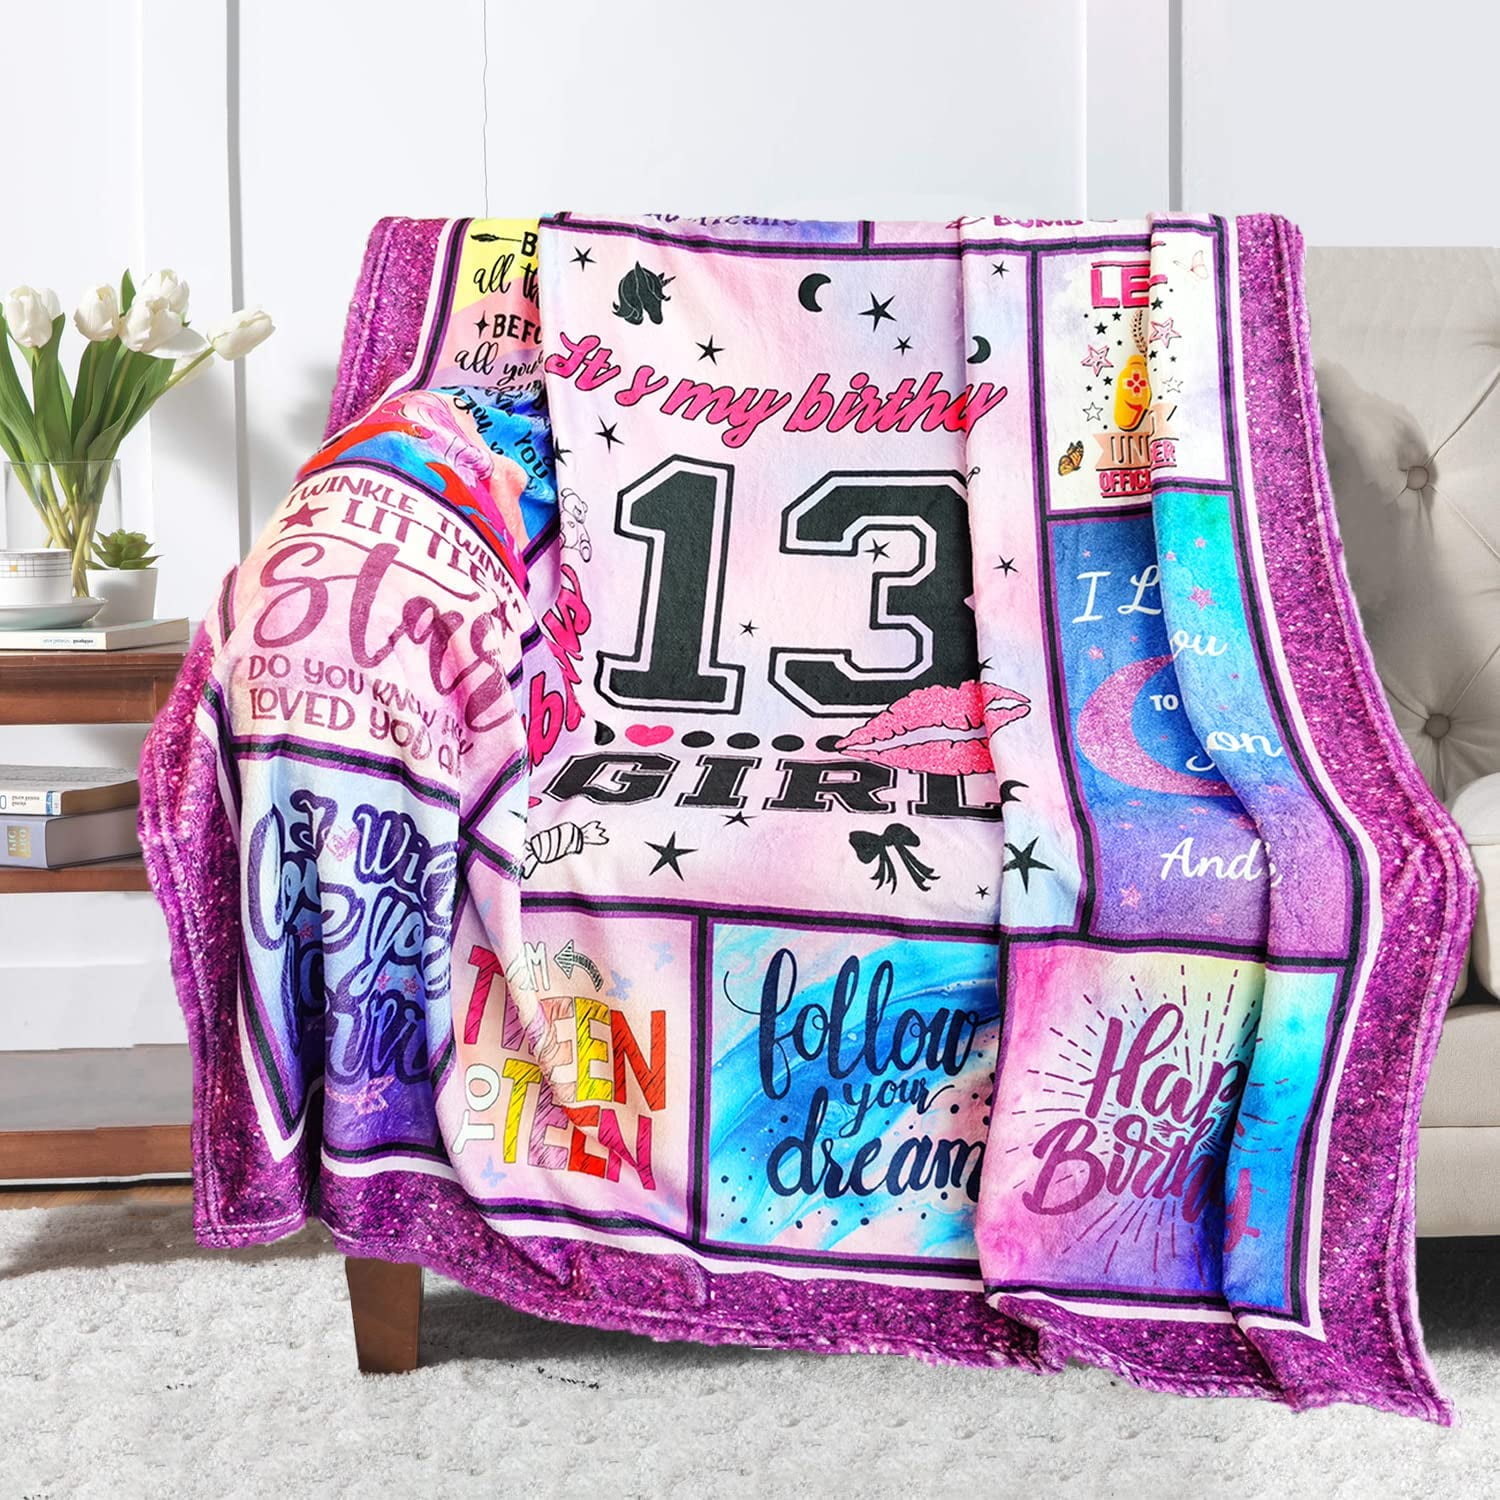 RooRuns 17 Year Old Girl Gifts Ideas, 17th Birthday Gifts for